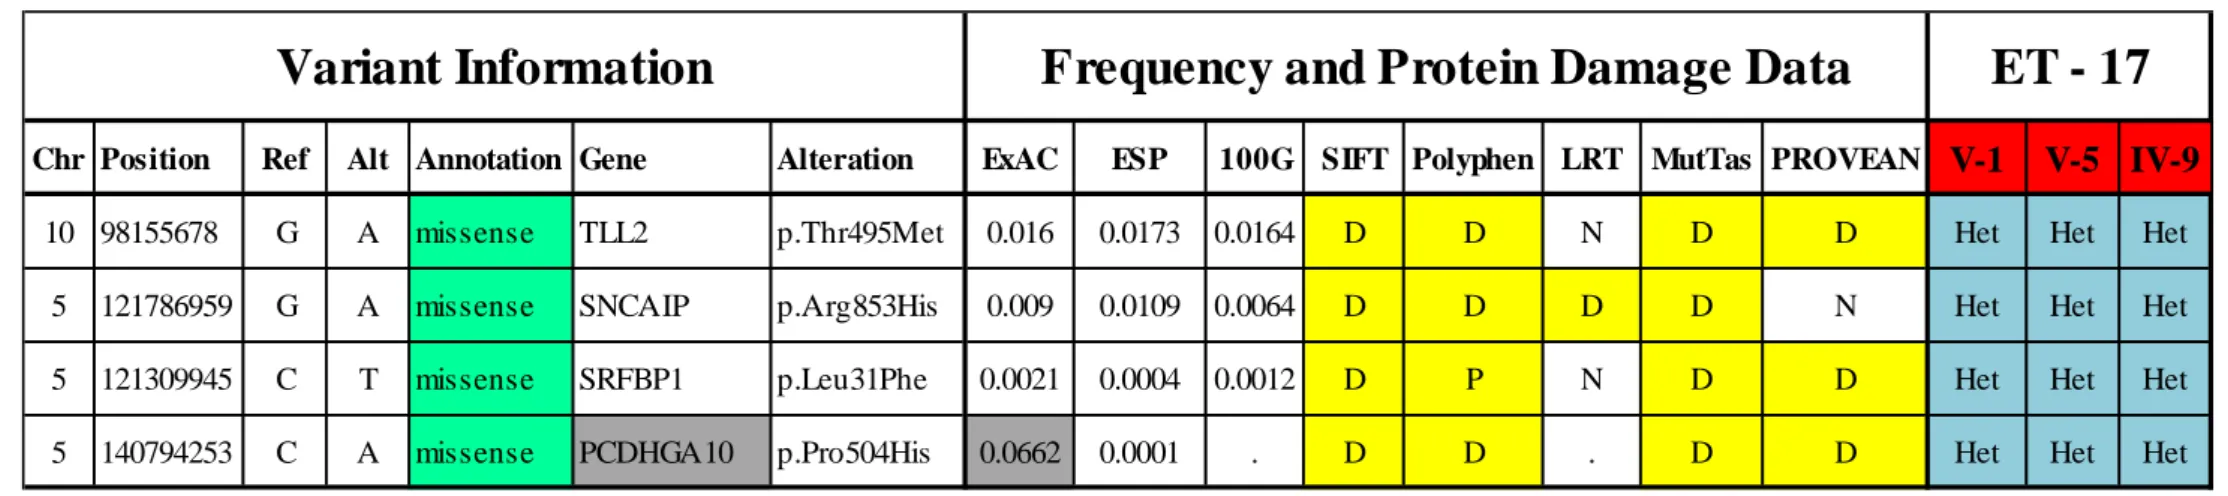 Table 4 List of prioritized variants that were heterozygous for the proband of family ET-17